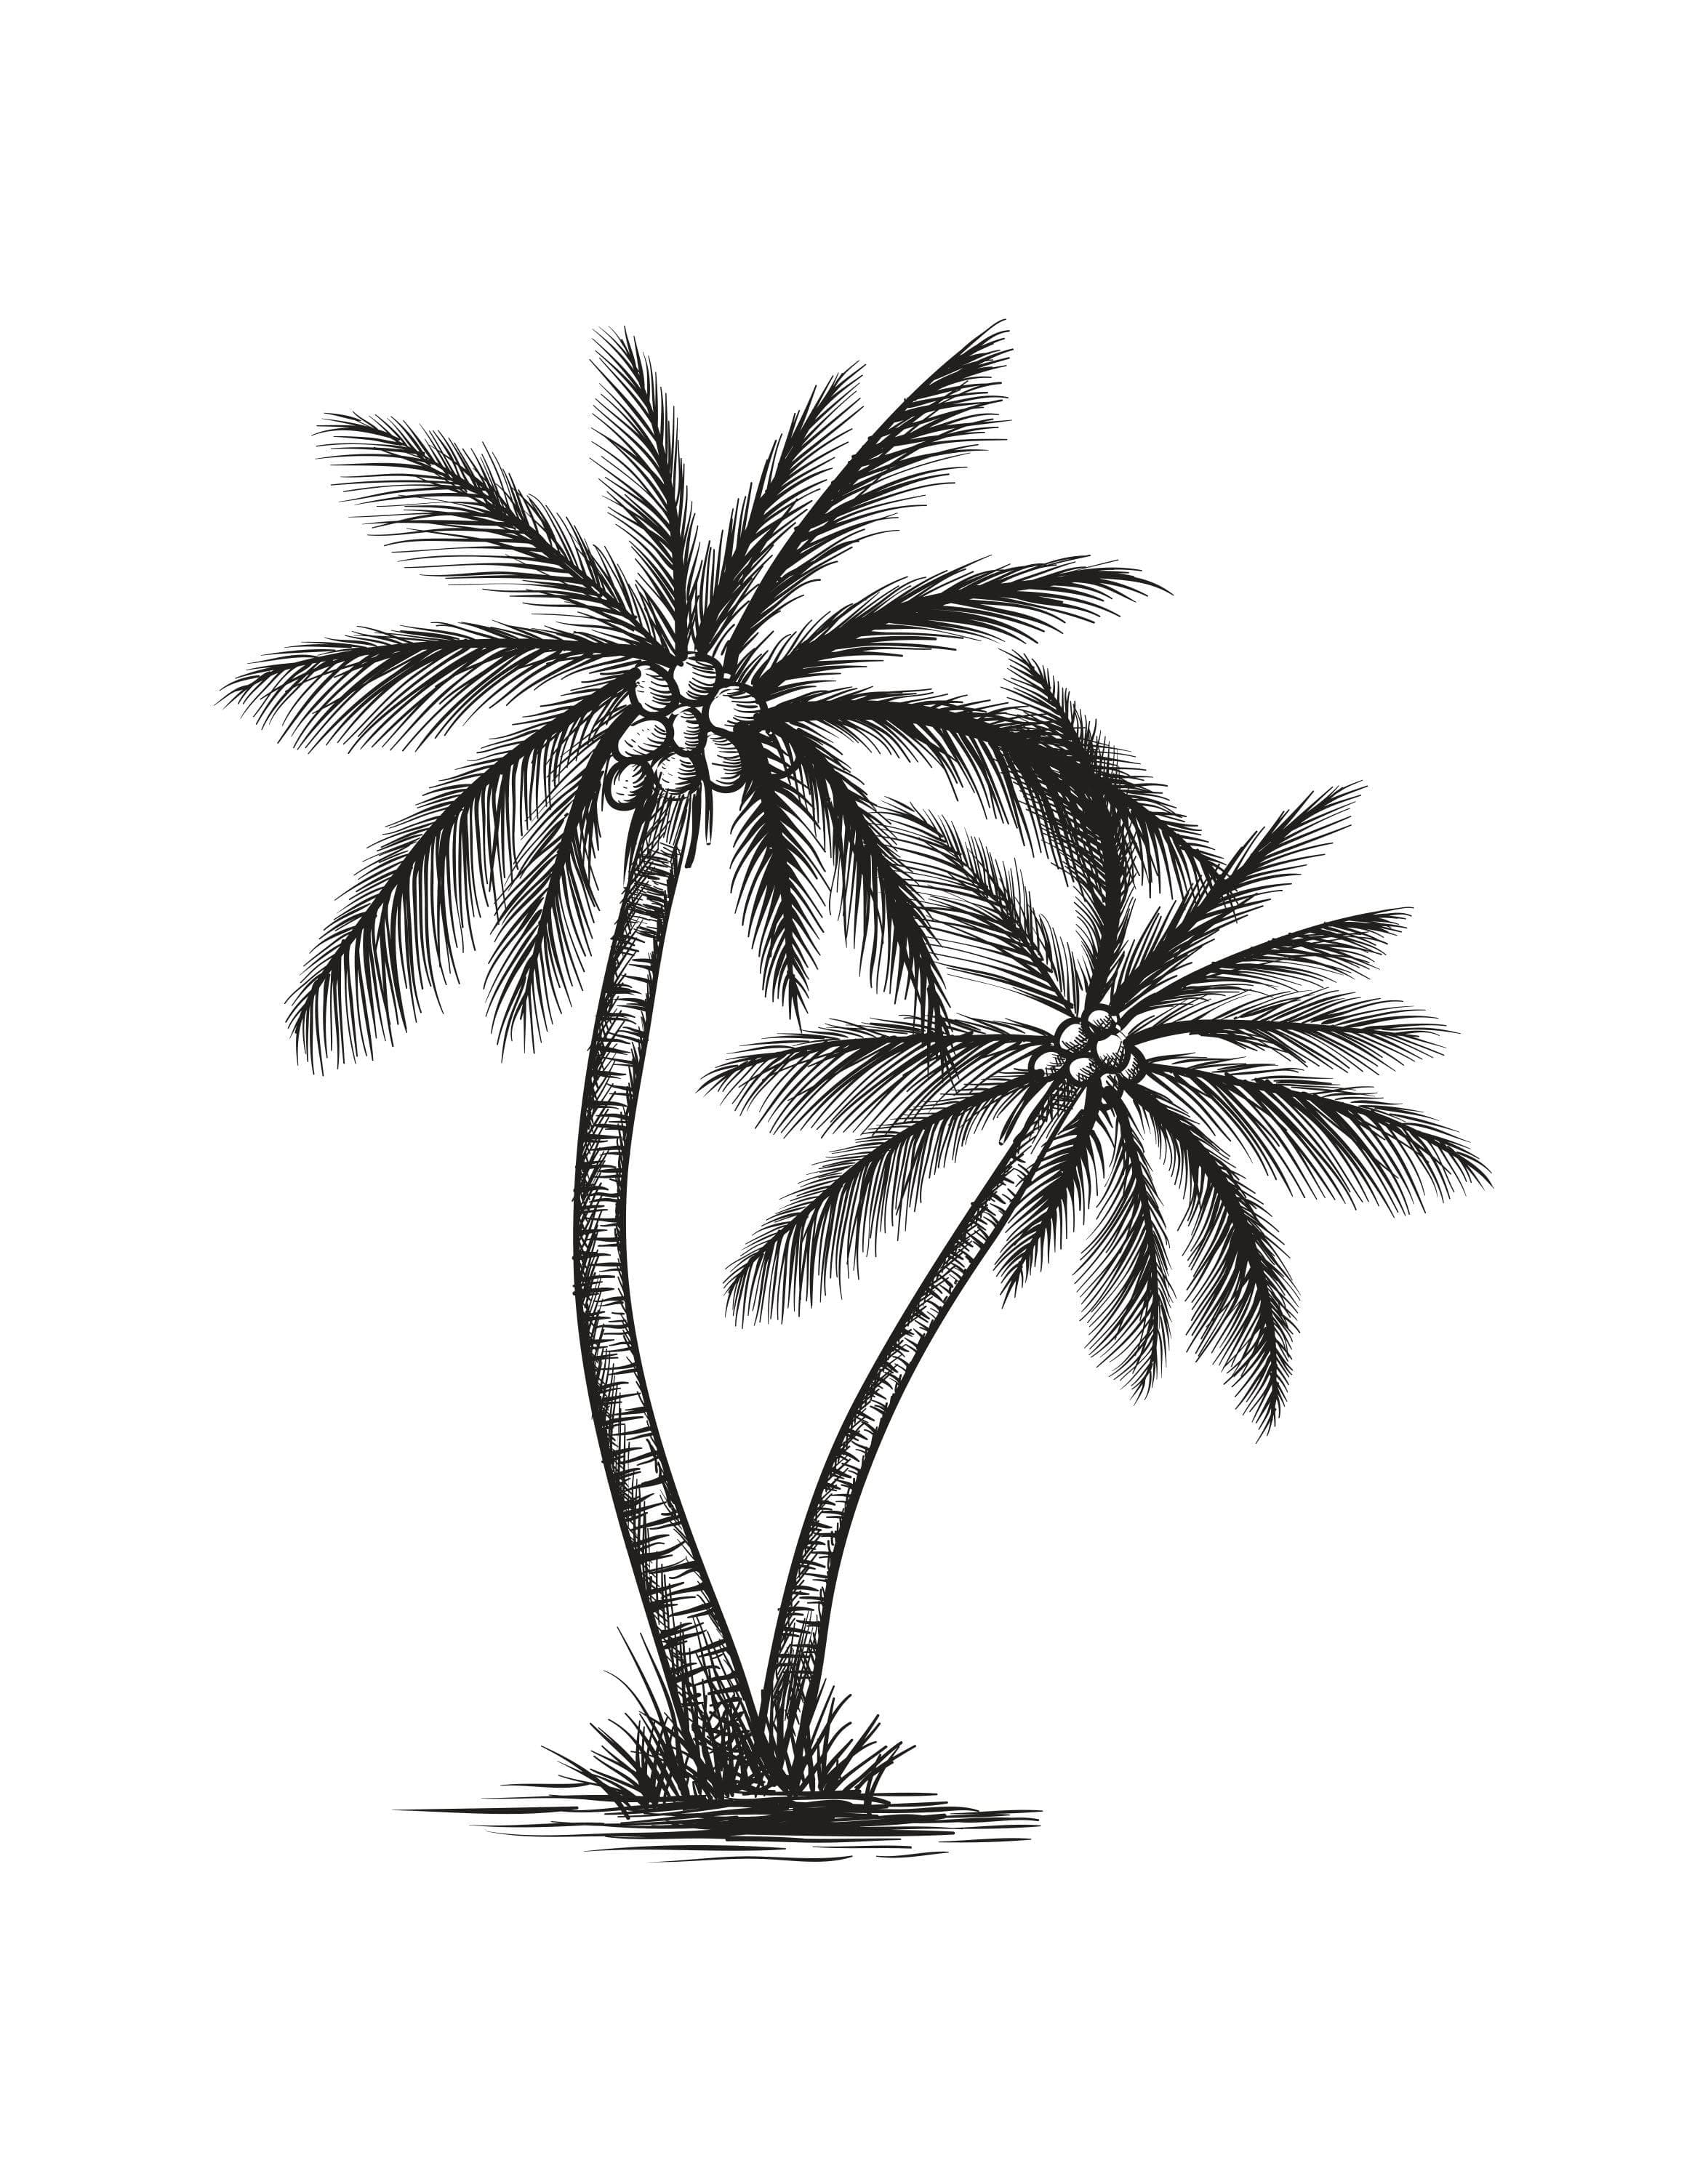 Tropical Paradise: A Beach and Hut Resort Print with Four Coconut Tree